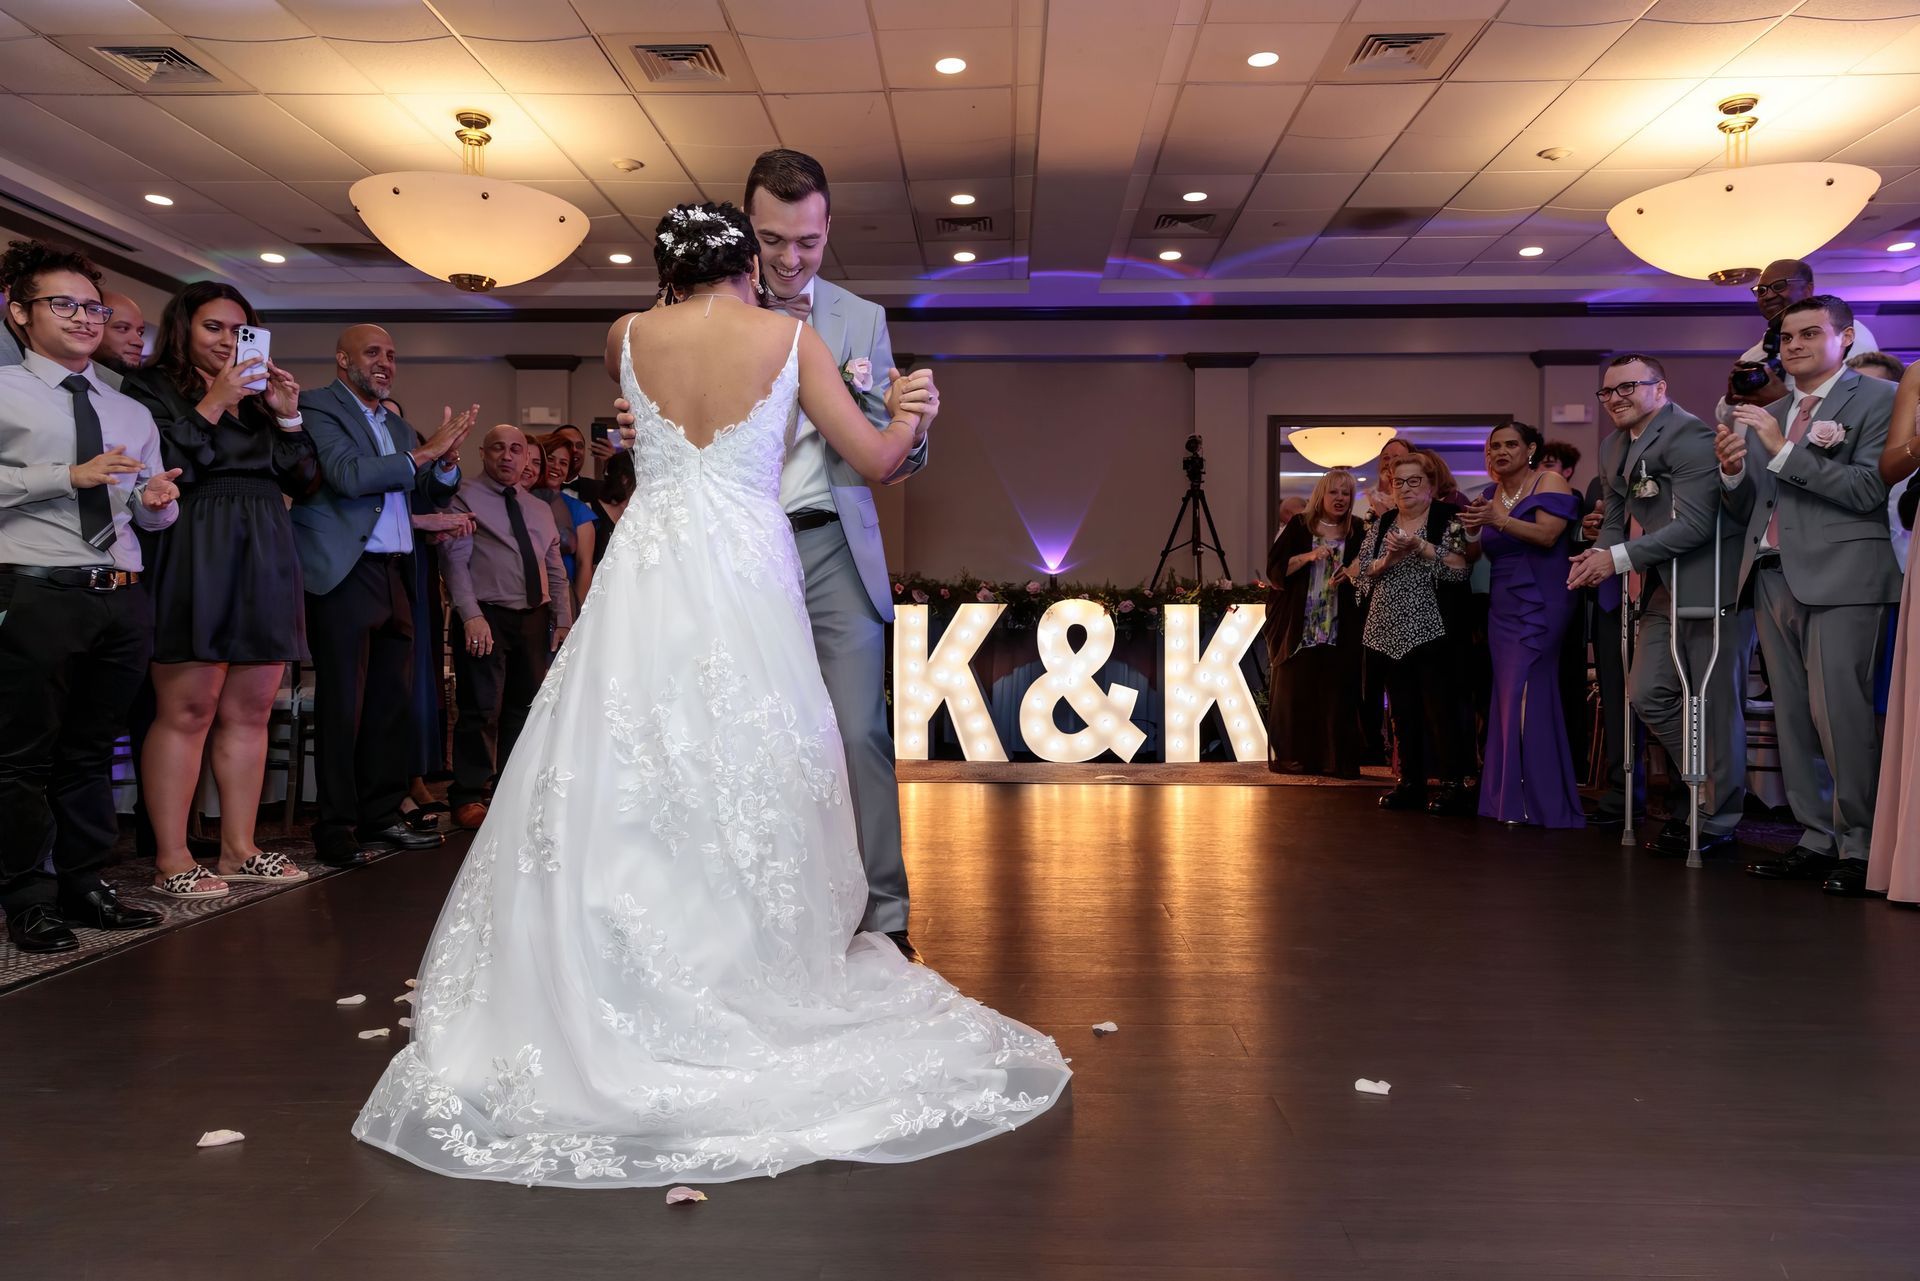 A bride and groom are dancing in front of a sign that says k & k.